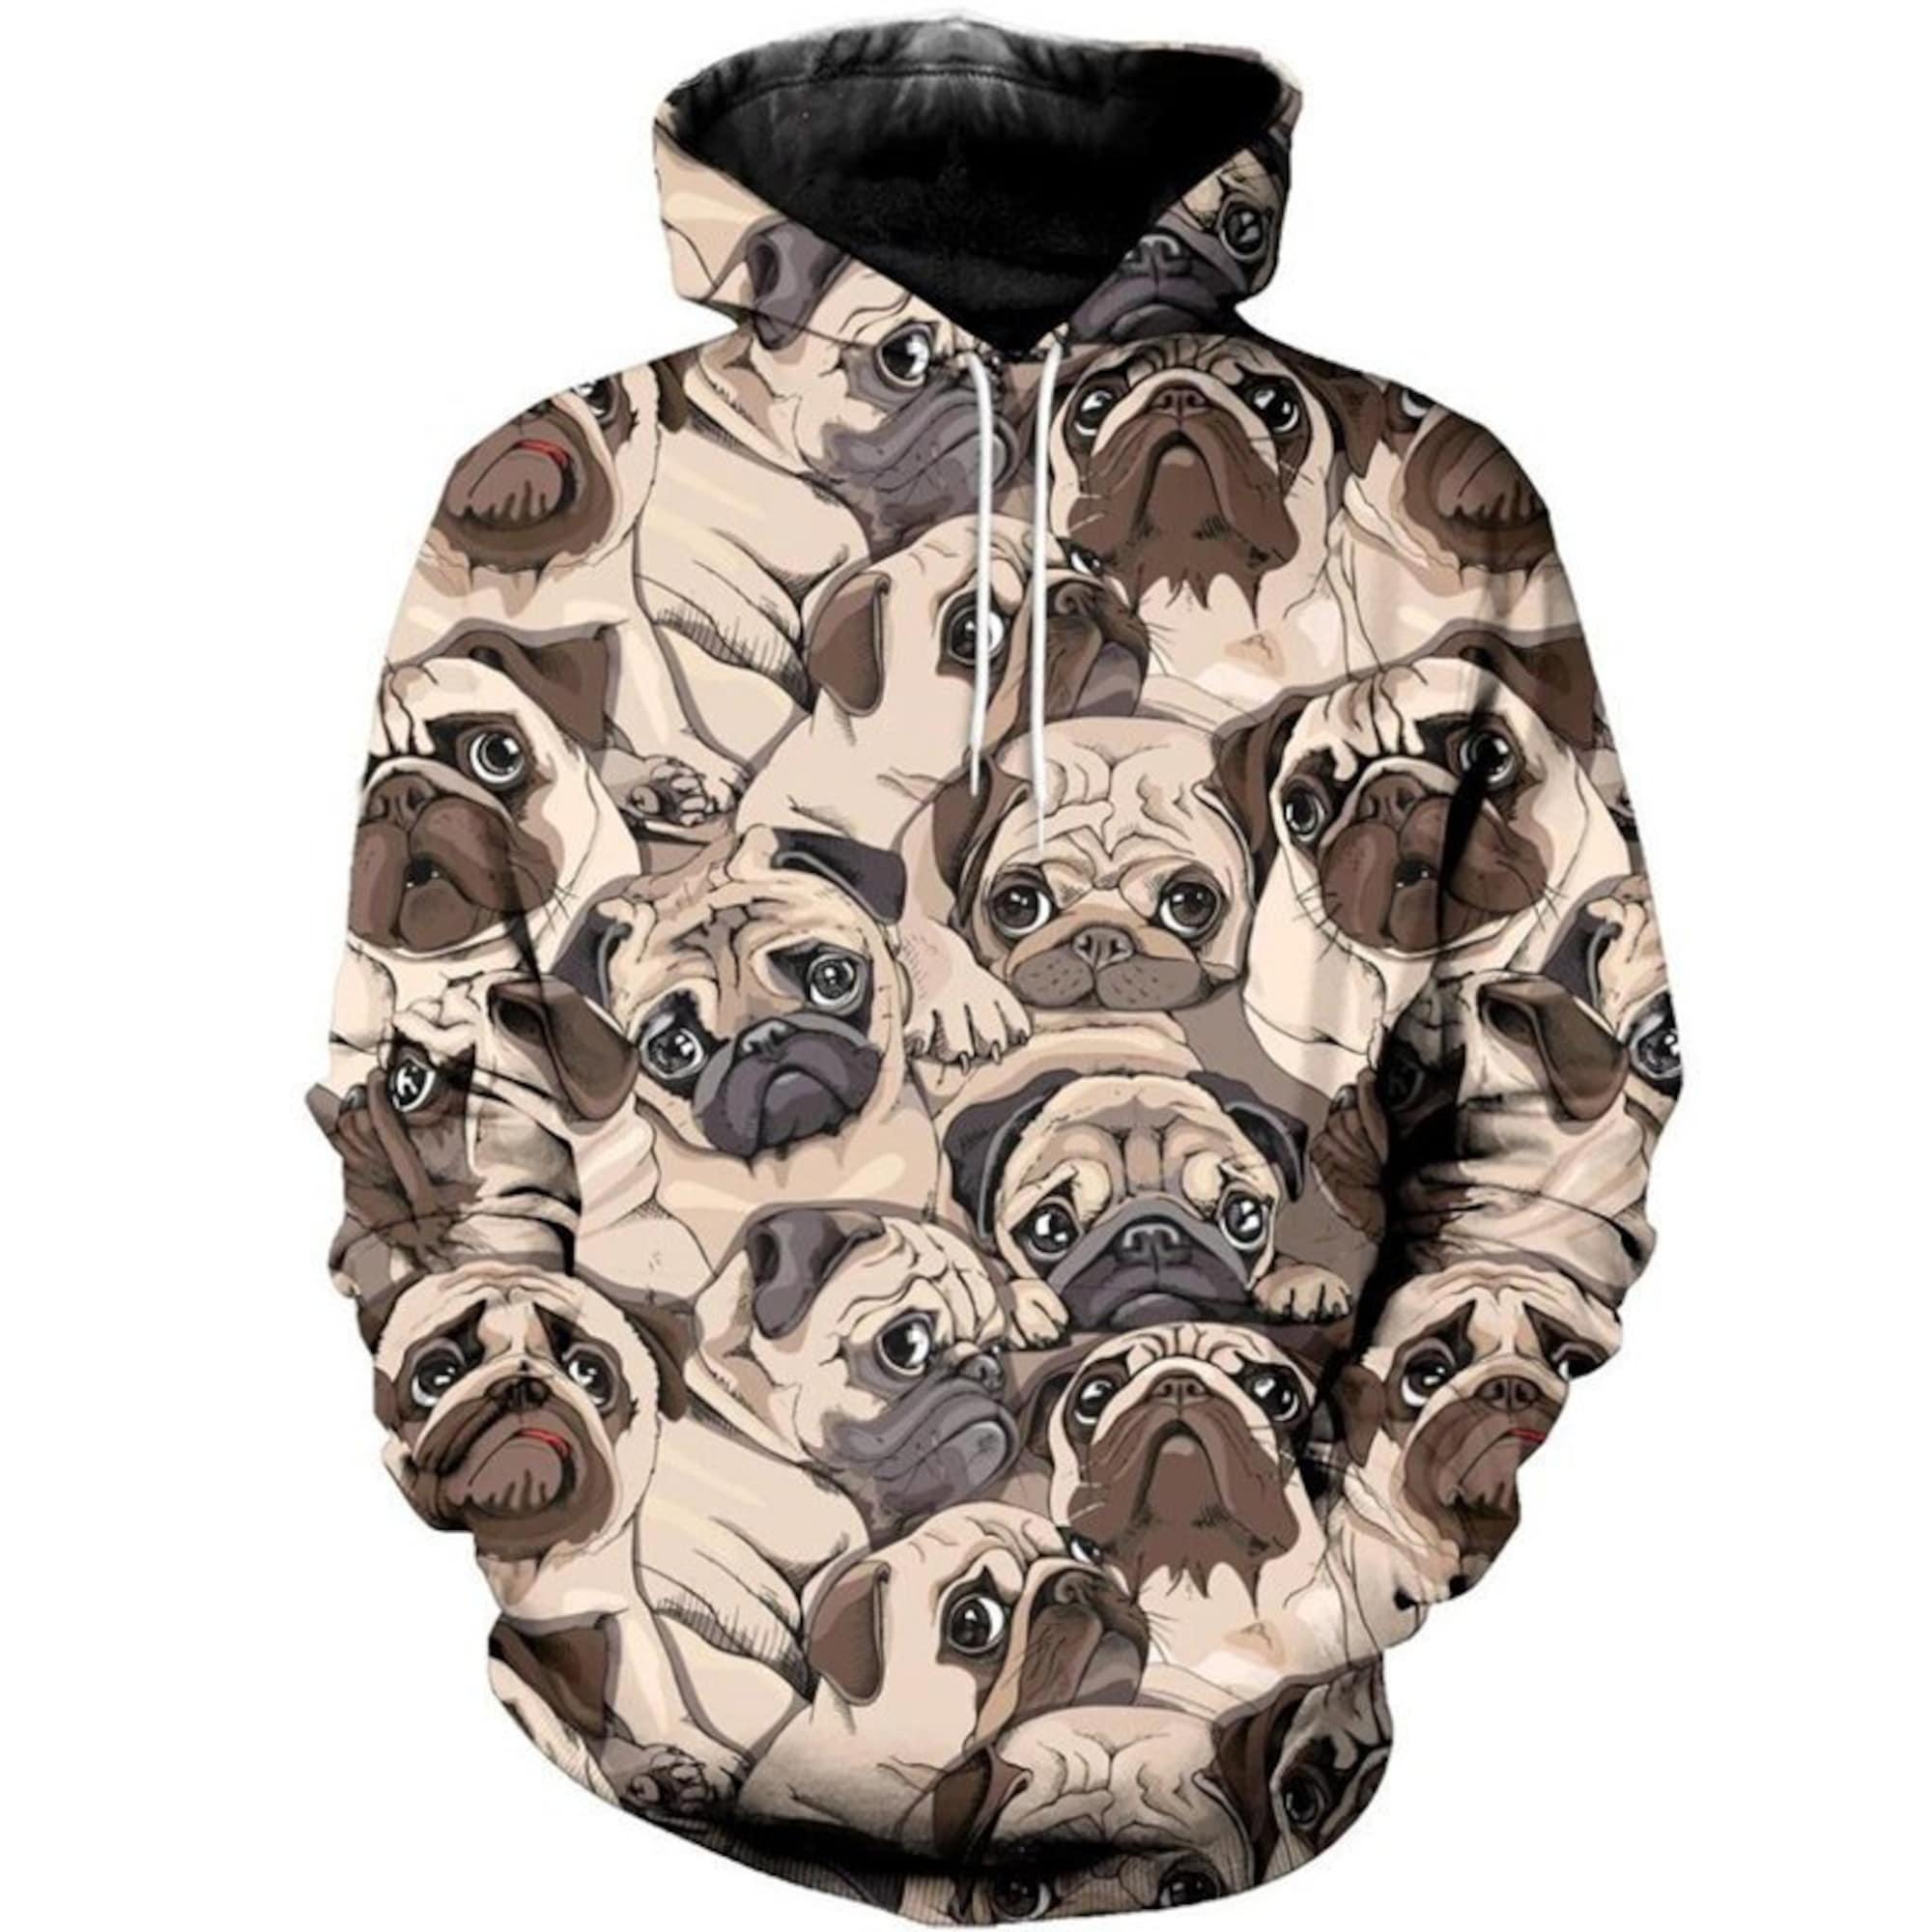 Discover Pug 3D Hoodie